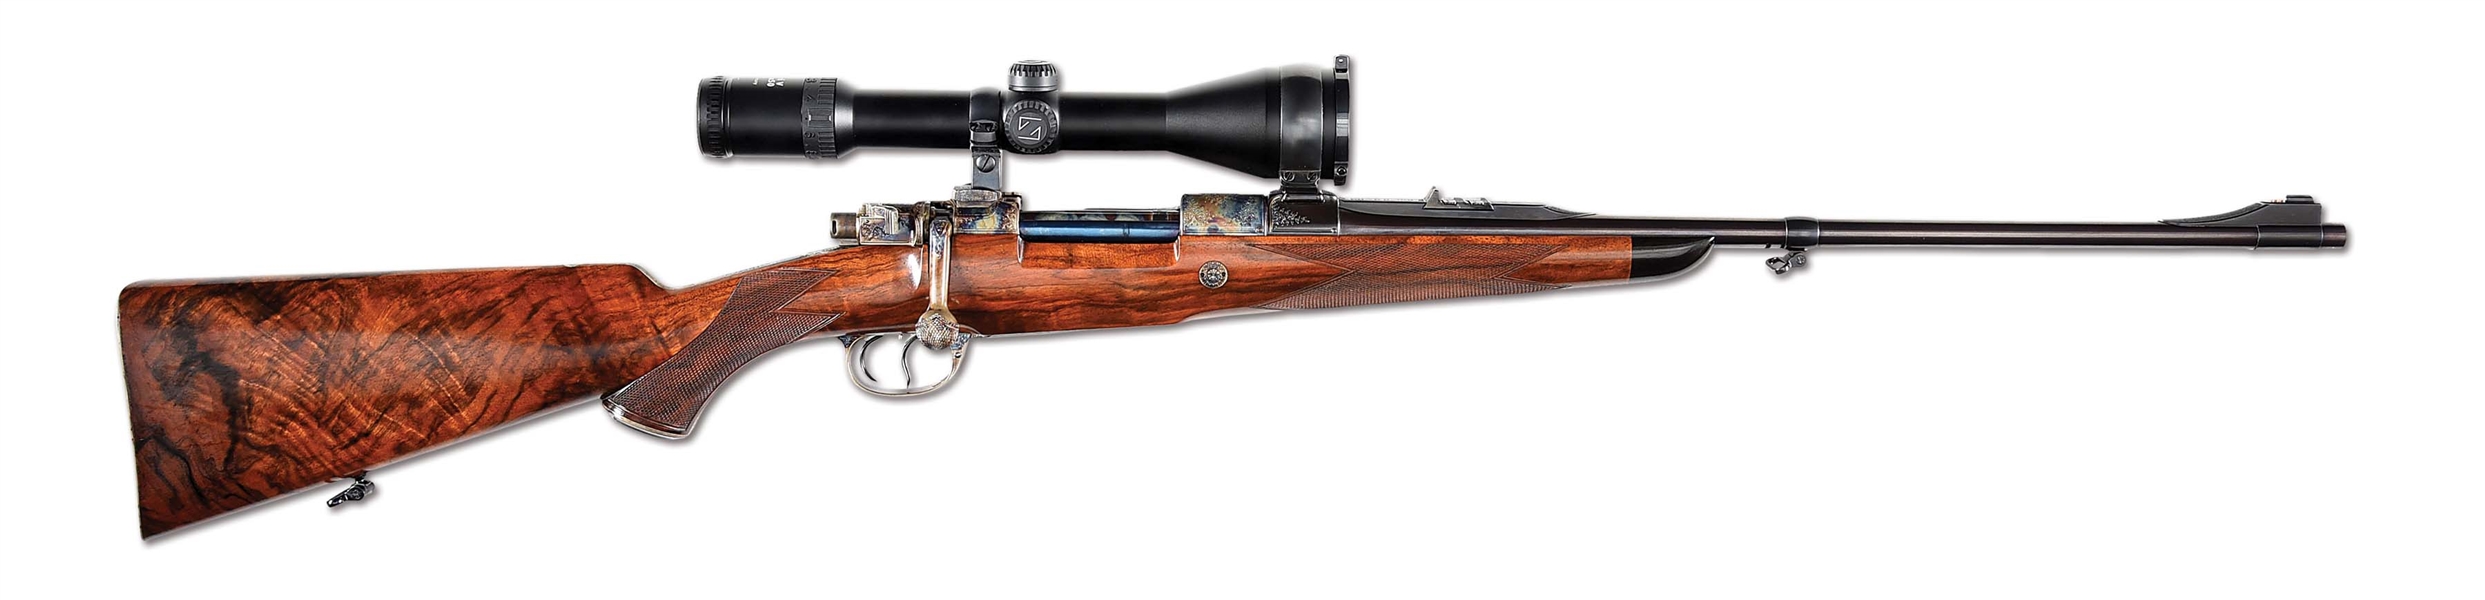 (M) HARTMANN & WEISS BEST QUALITY BOLT ACTION RIFLE IN 6.5X65 WITH ZEISS DIAVARI SCOPE.